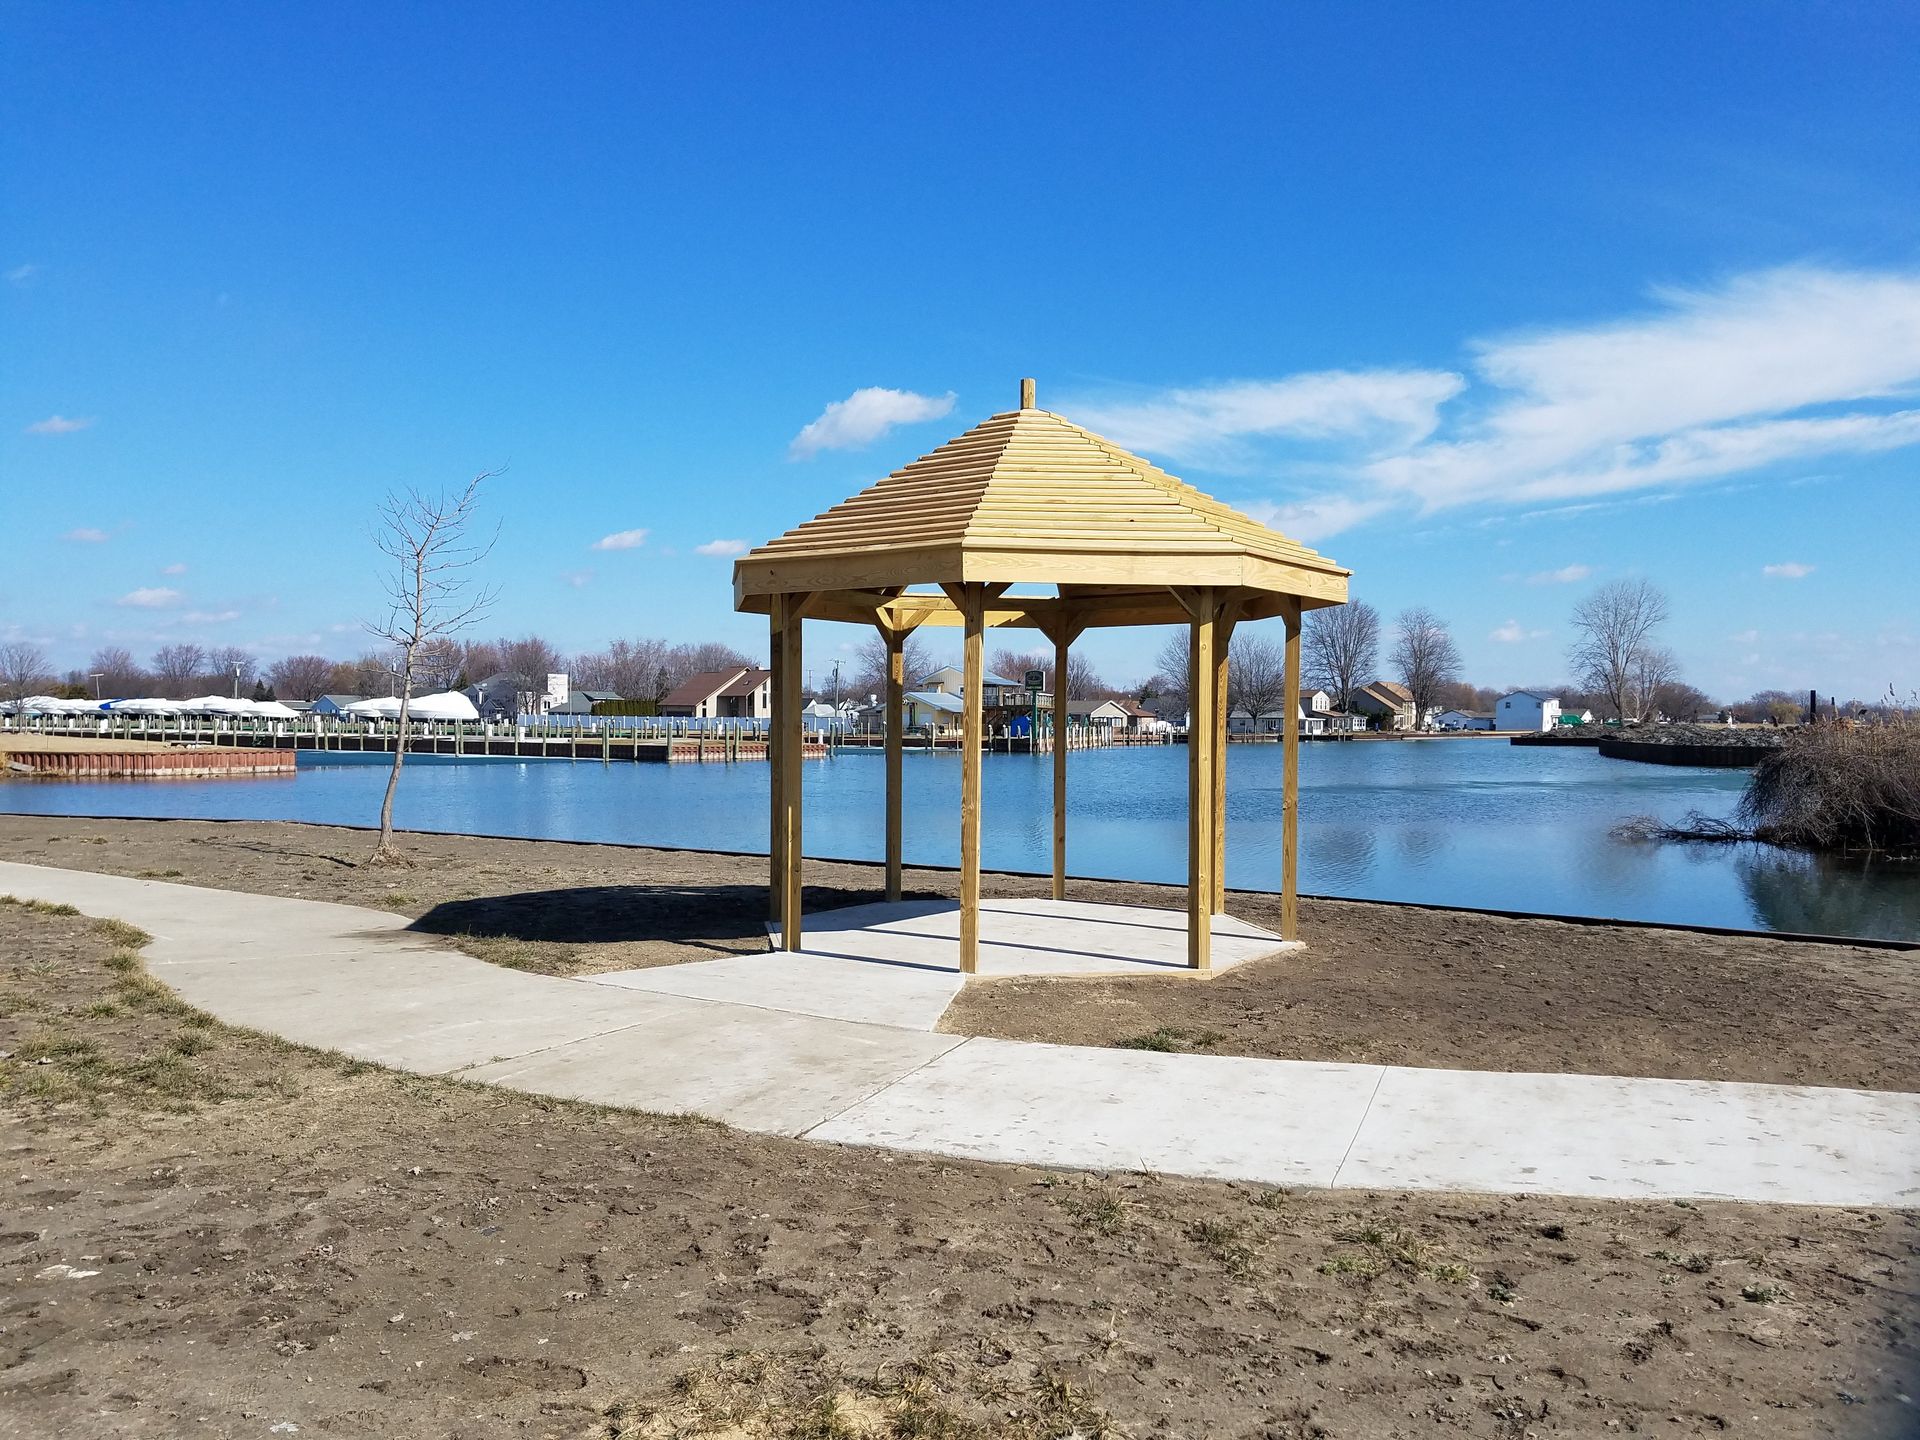 A wooden gazebo sits on the shore of a lake.